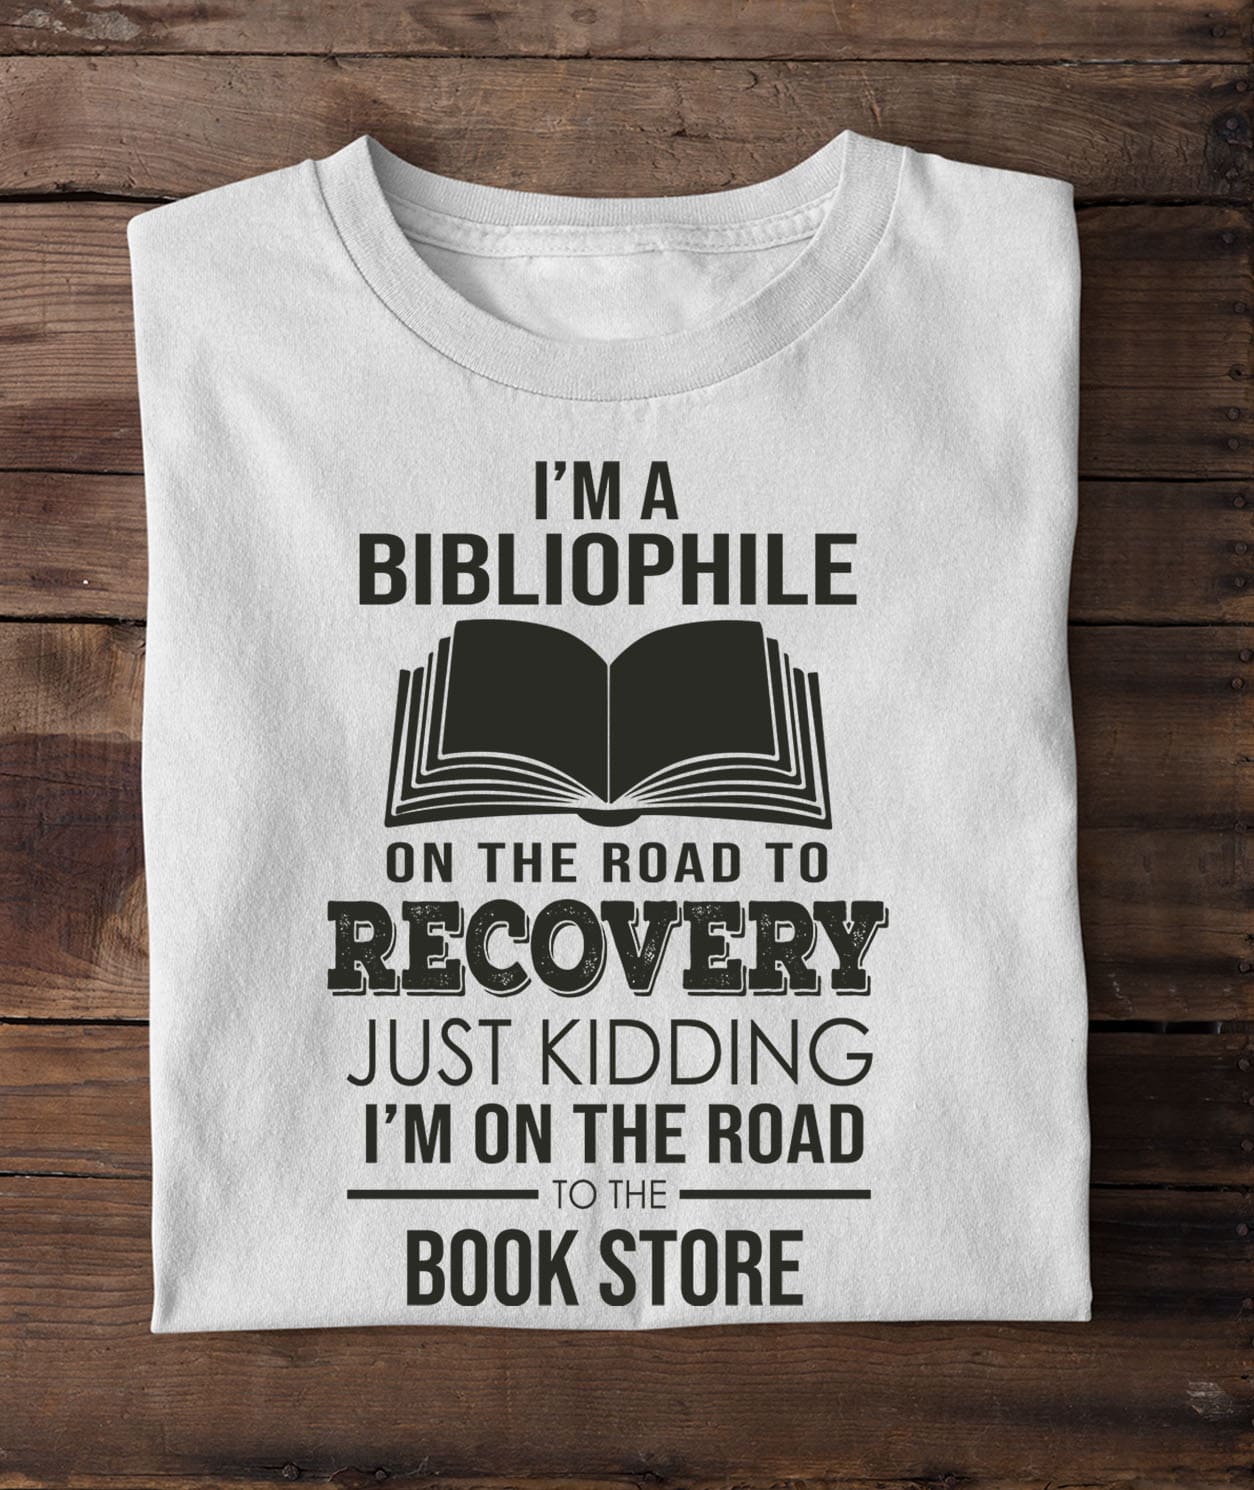 I'm a bibliophile on the road to recovery just kidding I'm on the road to the book store